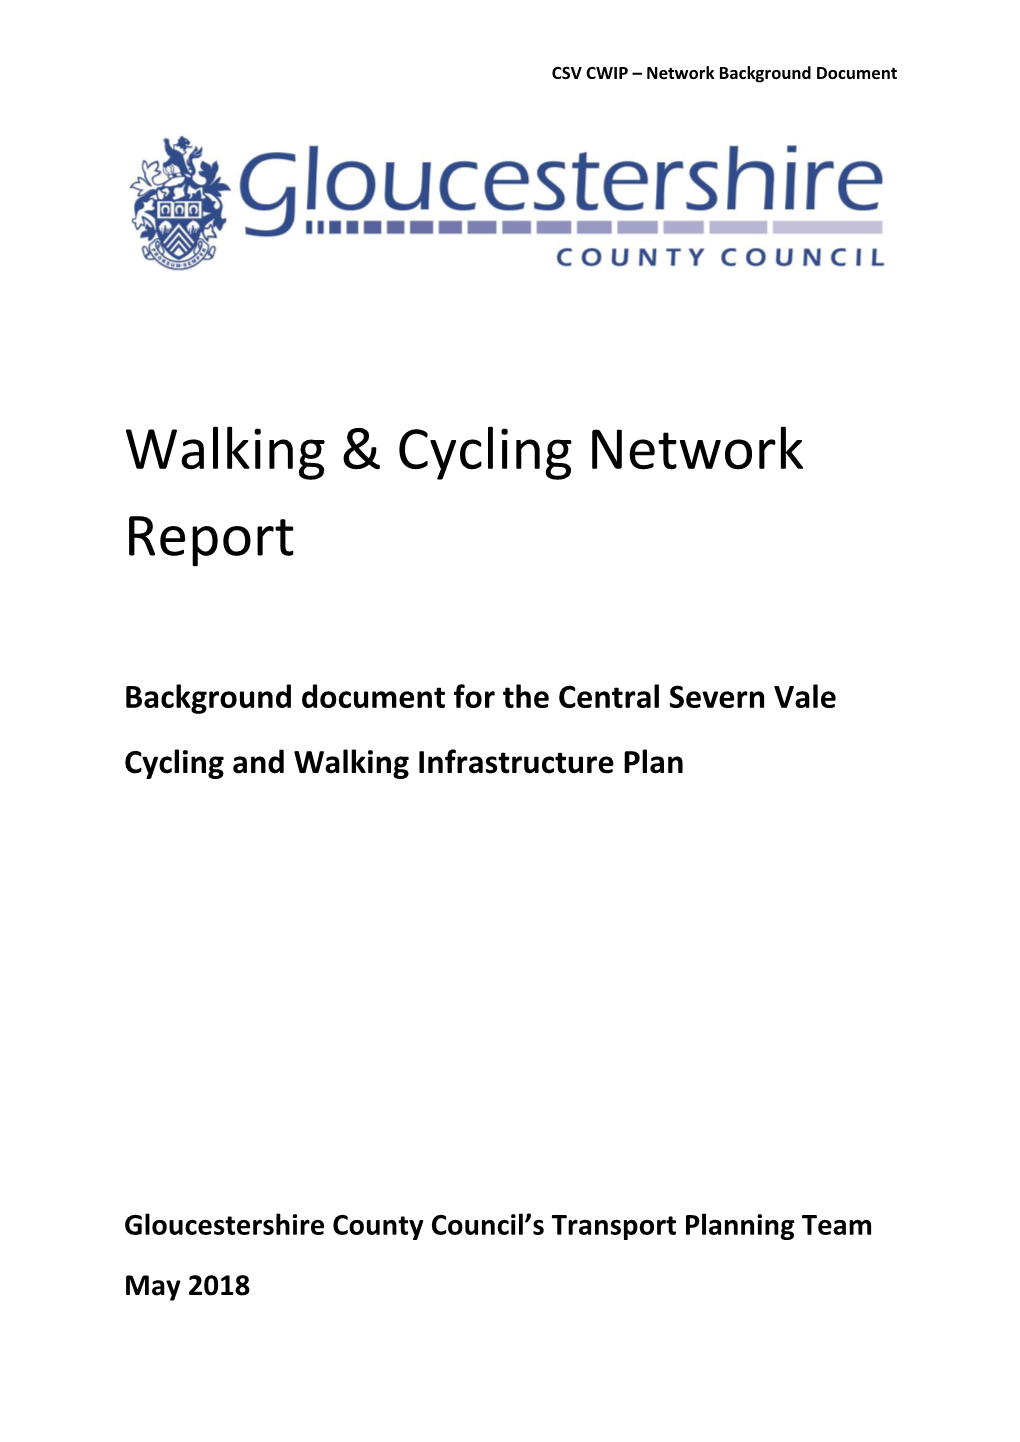 Walking & Cycling Network Report